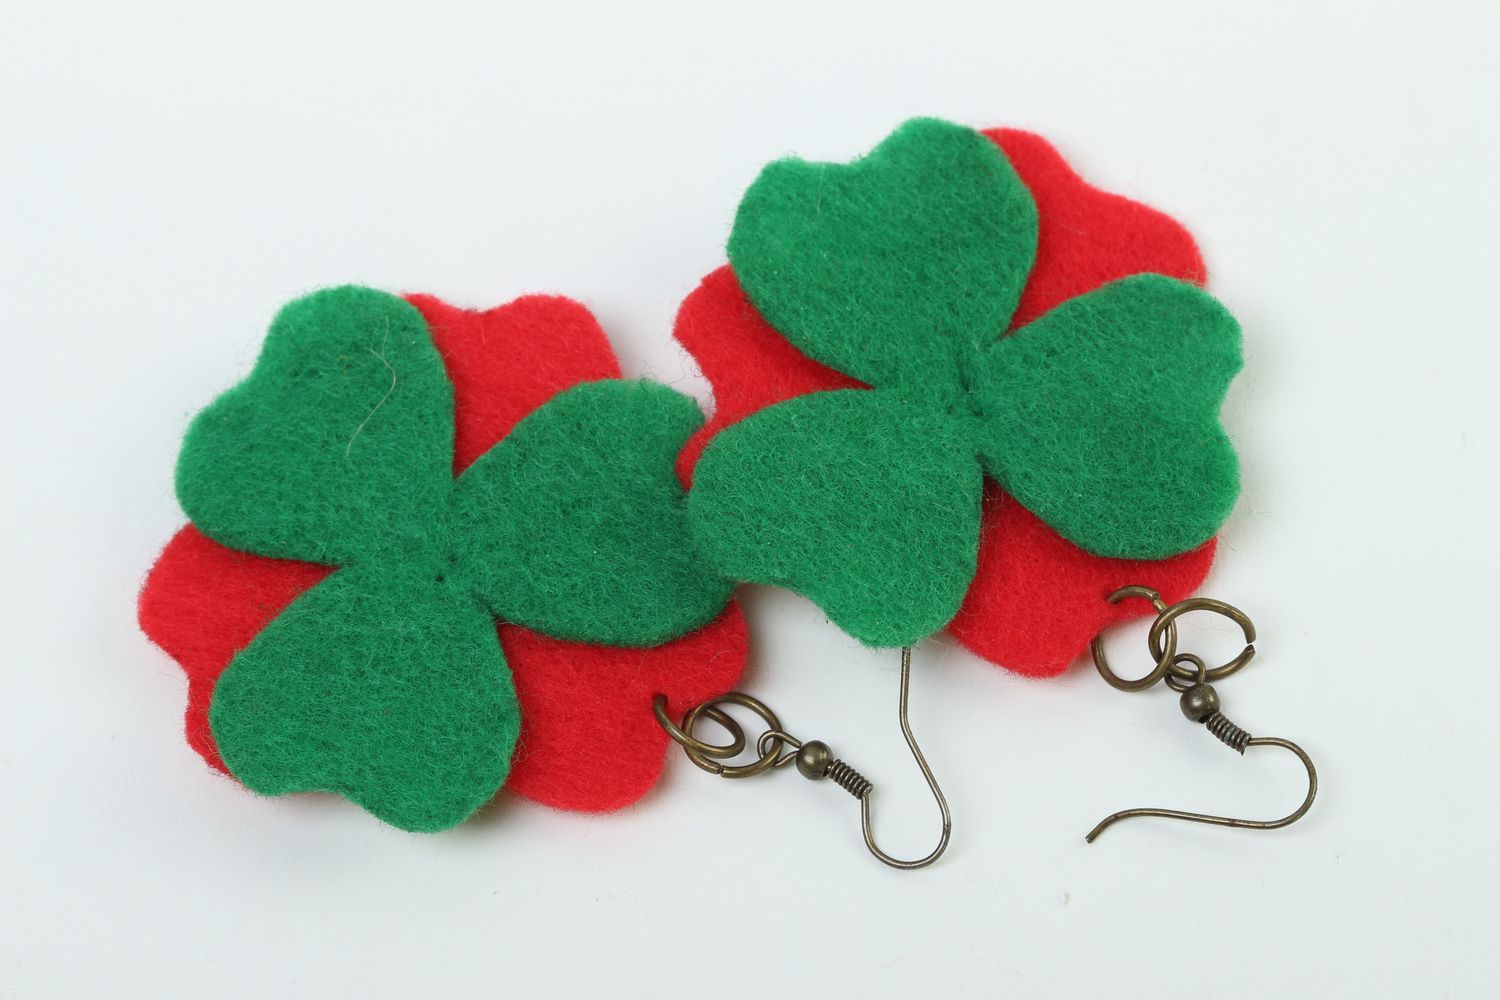 Handmade felted wool earrings fashion accessories for girls needle felting photo 4